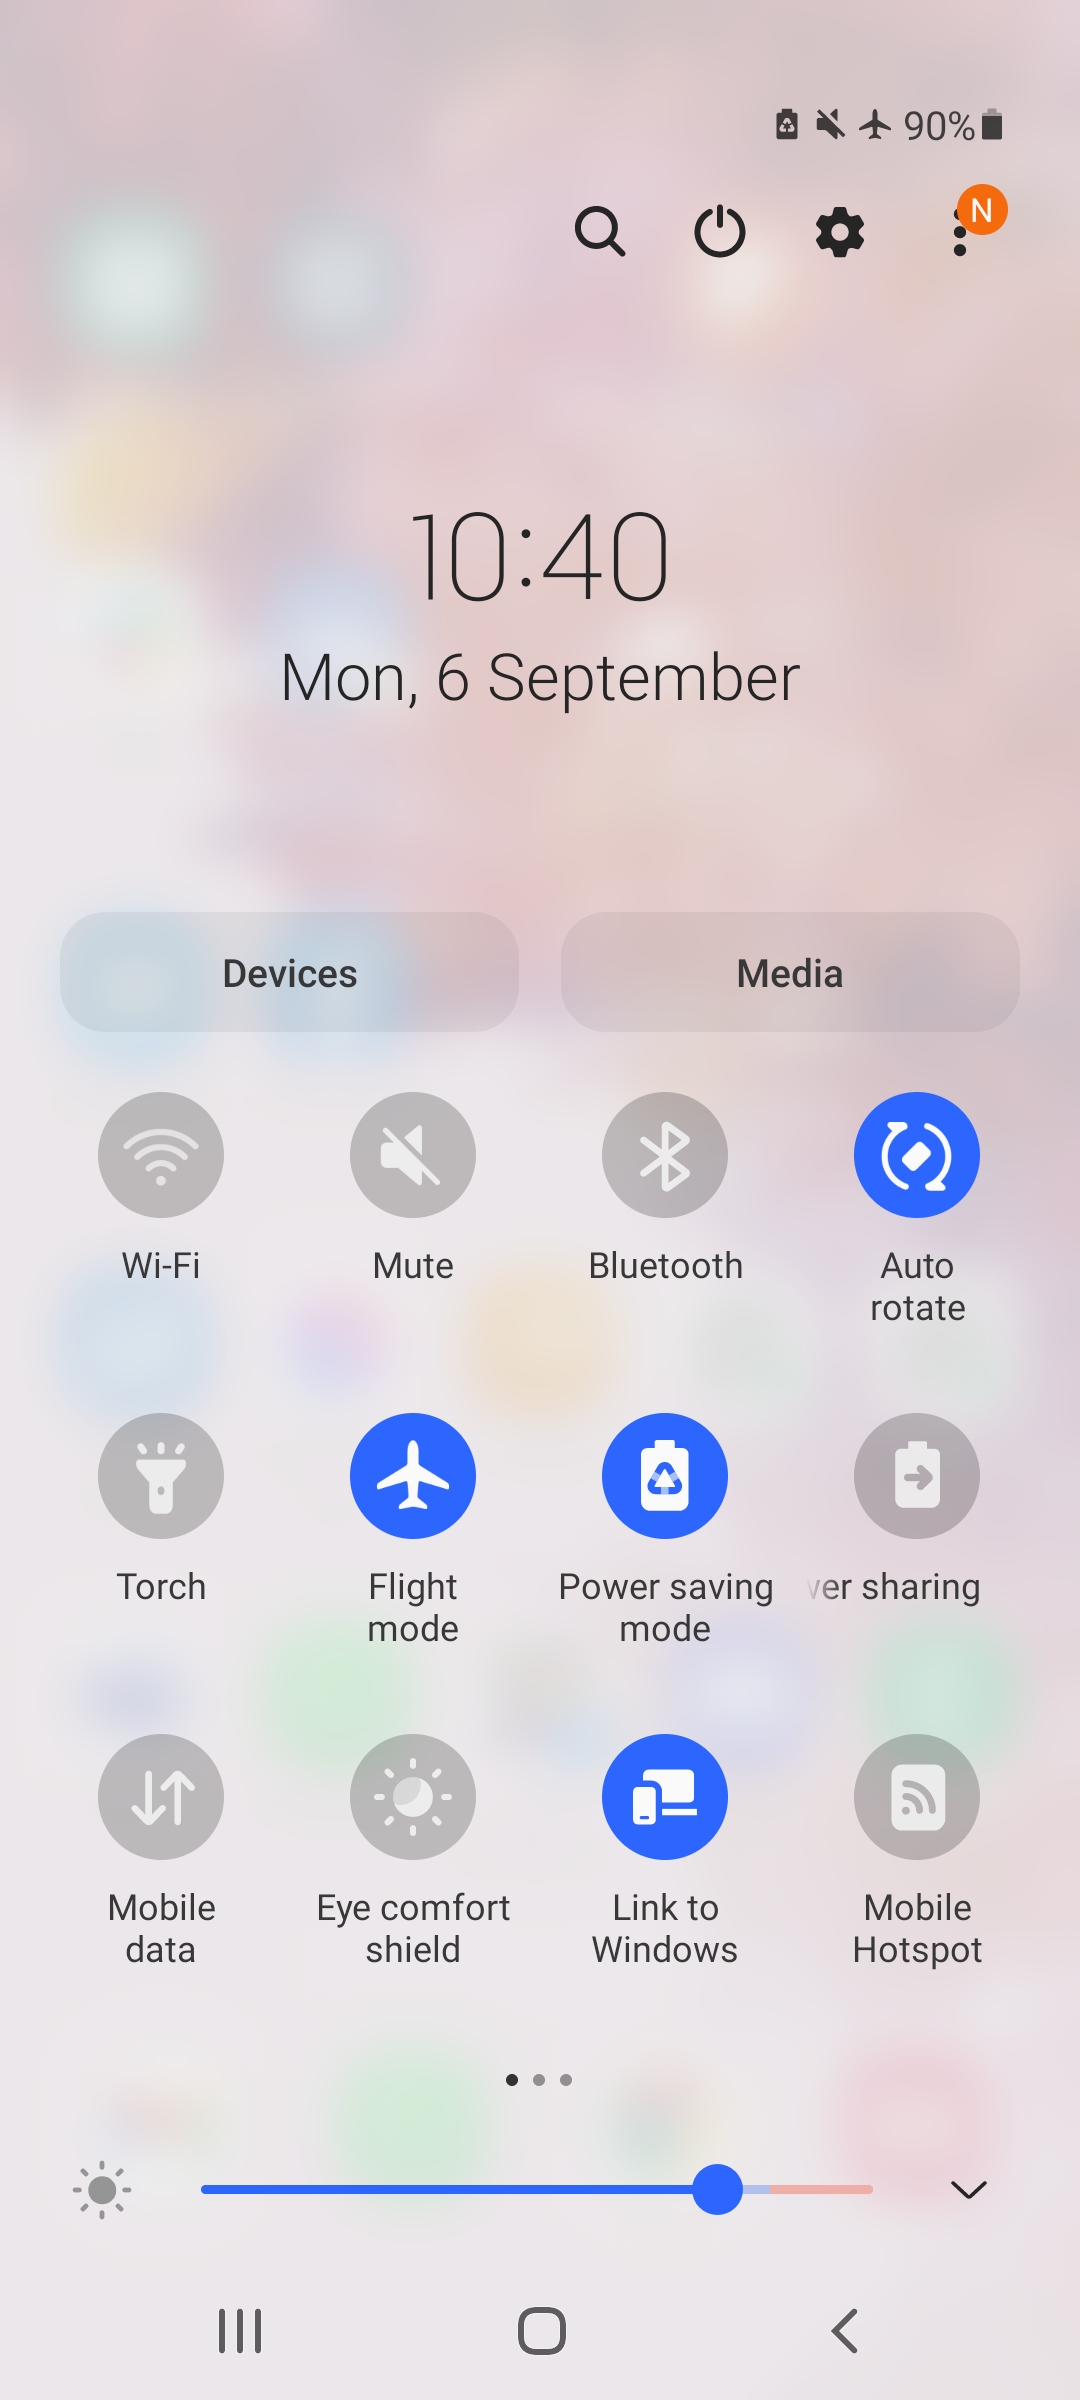 What is Airplane Mode? How it Works and When to Use it